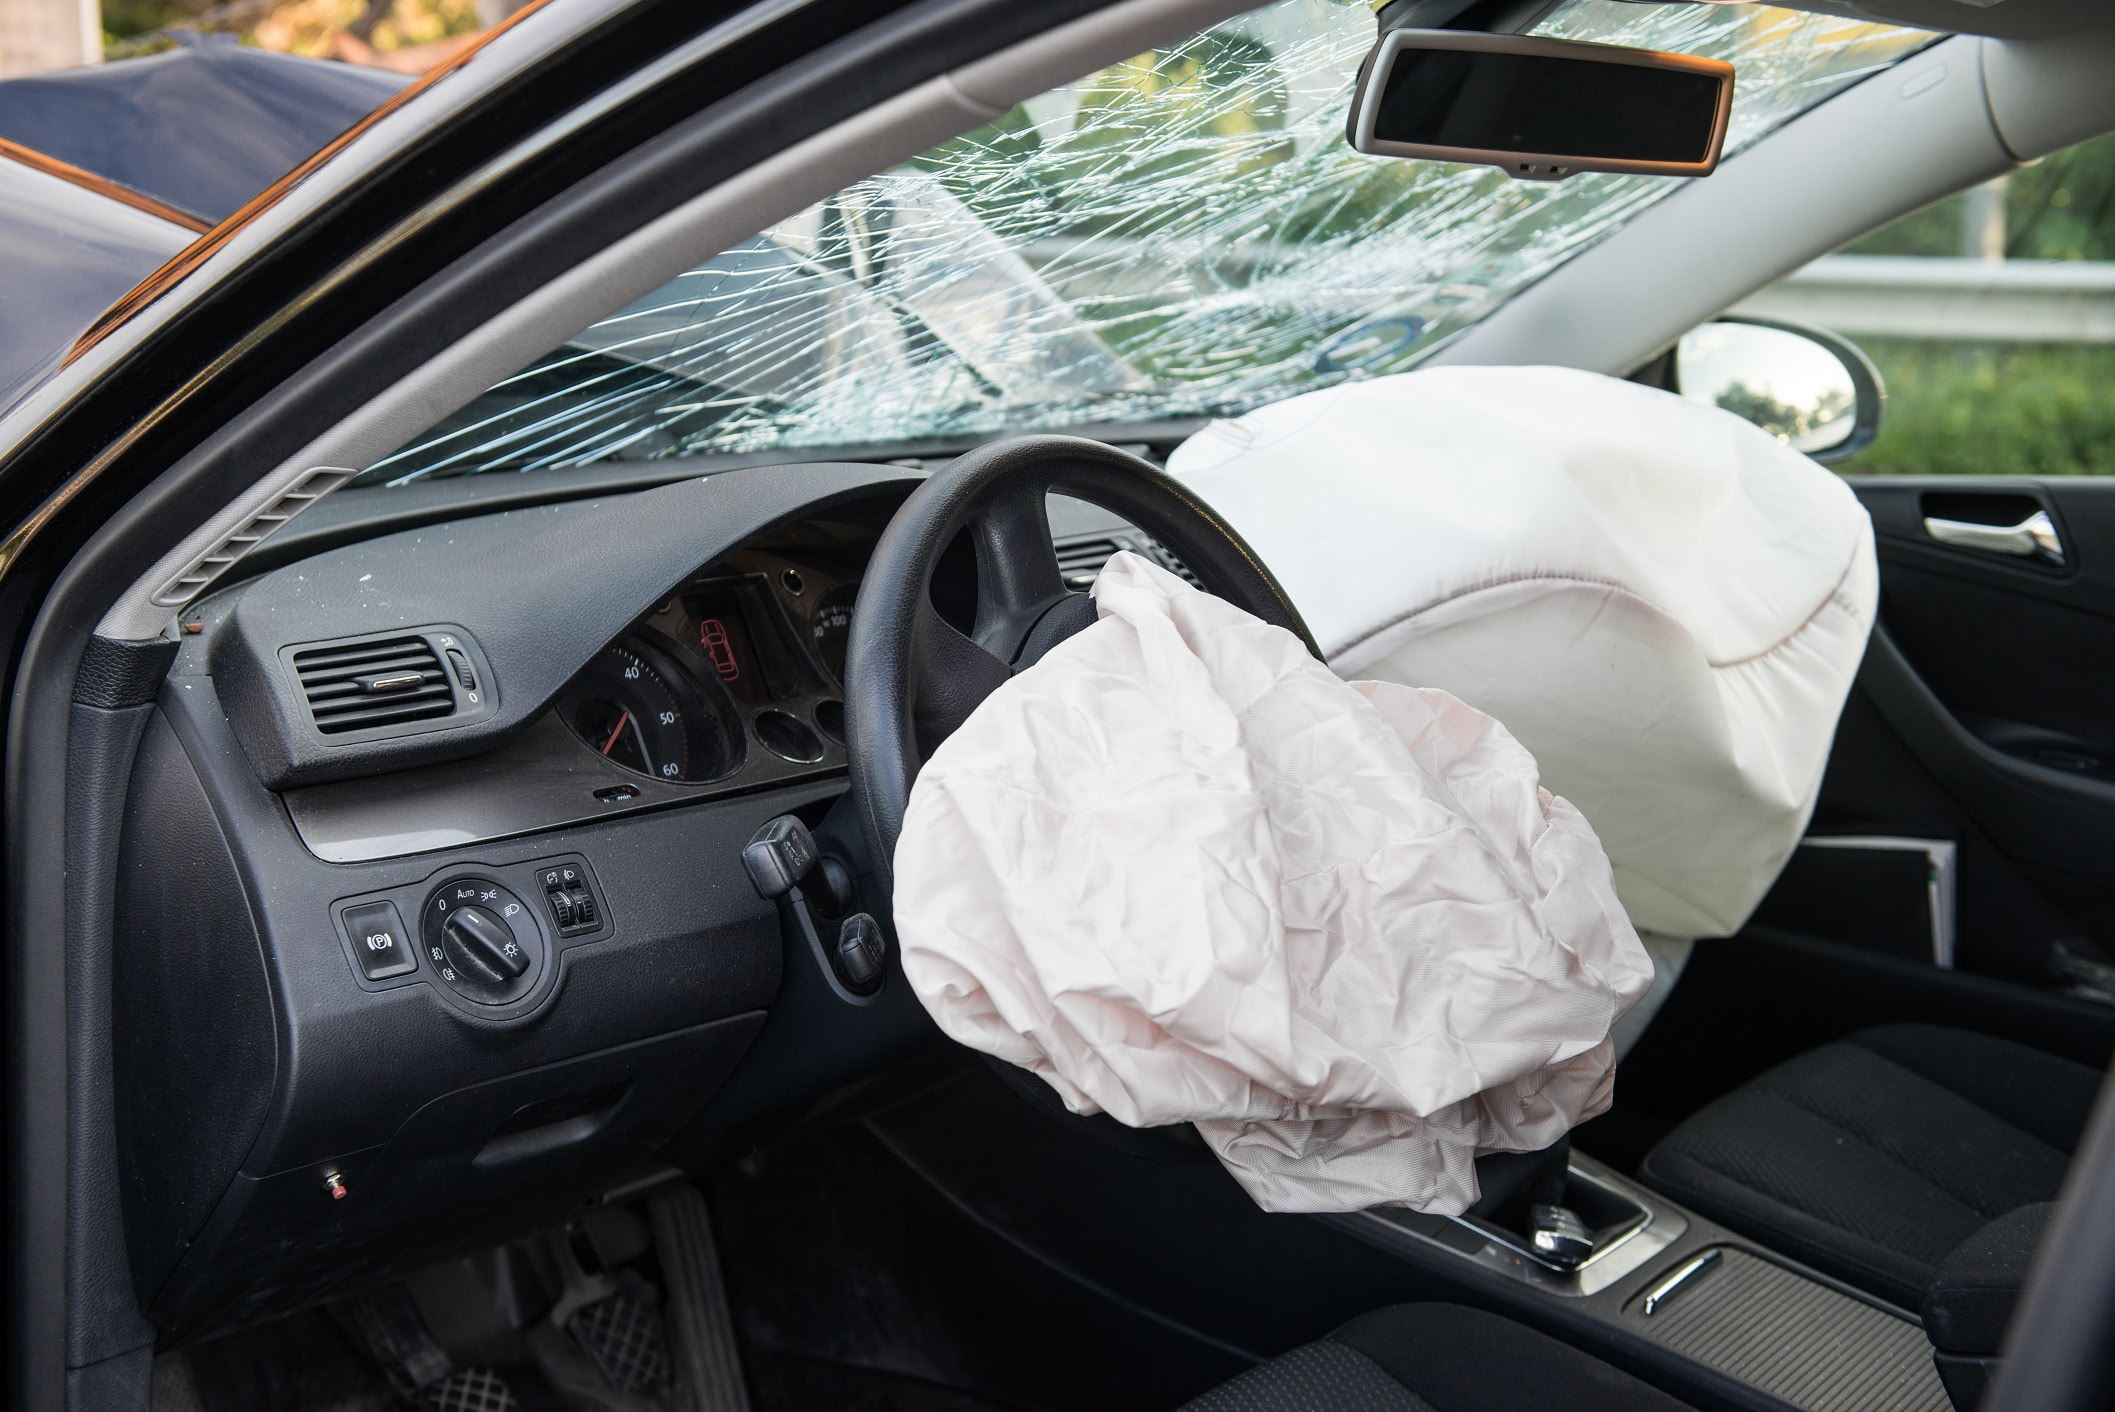 Cracked windshield and deployed airbag